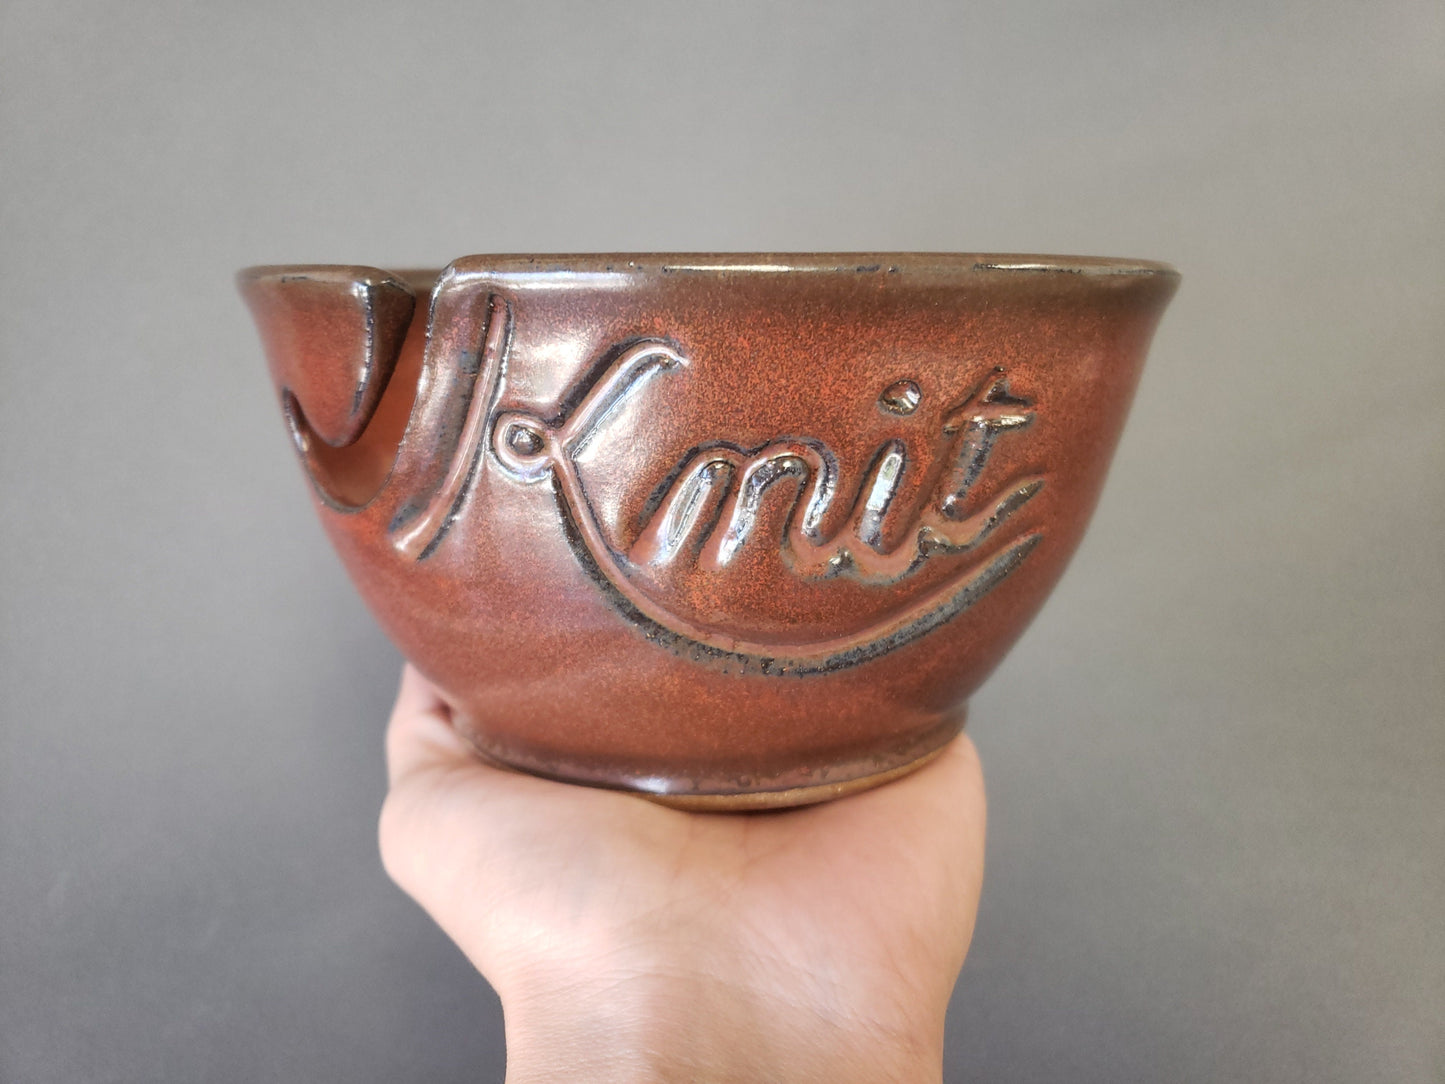 Yarn Bowl for Knitting Crochet Ceramic Handmade Pottery Craft Project Holder Room Decor Rust Red Large Size Fits Whole Skein